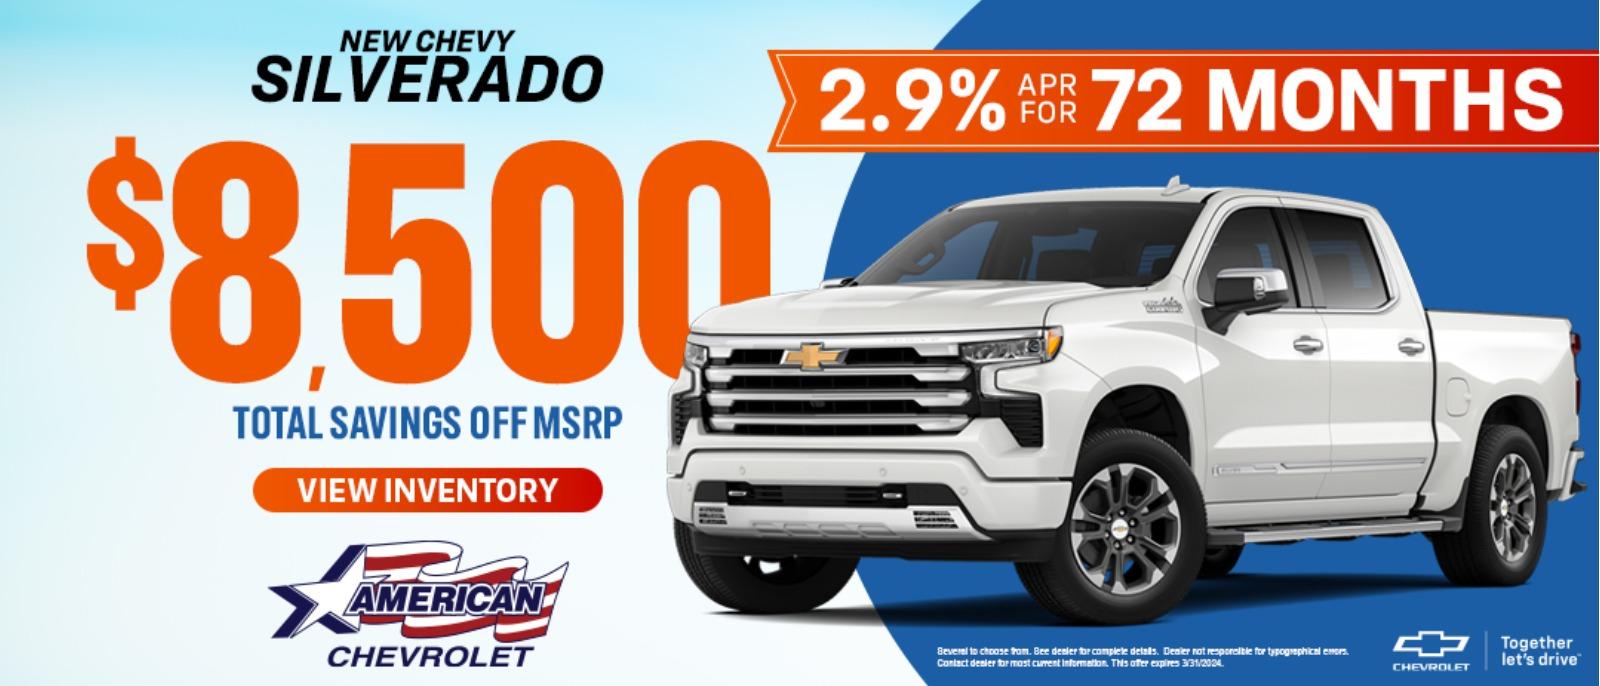 $8500 Total Savings Off MSRP
2.9% for 72 Months